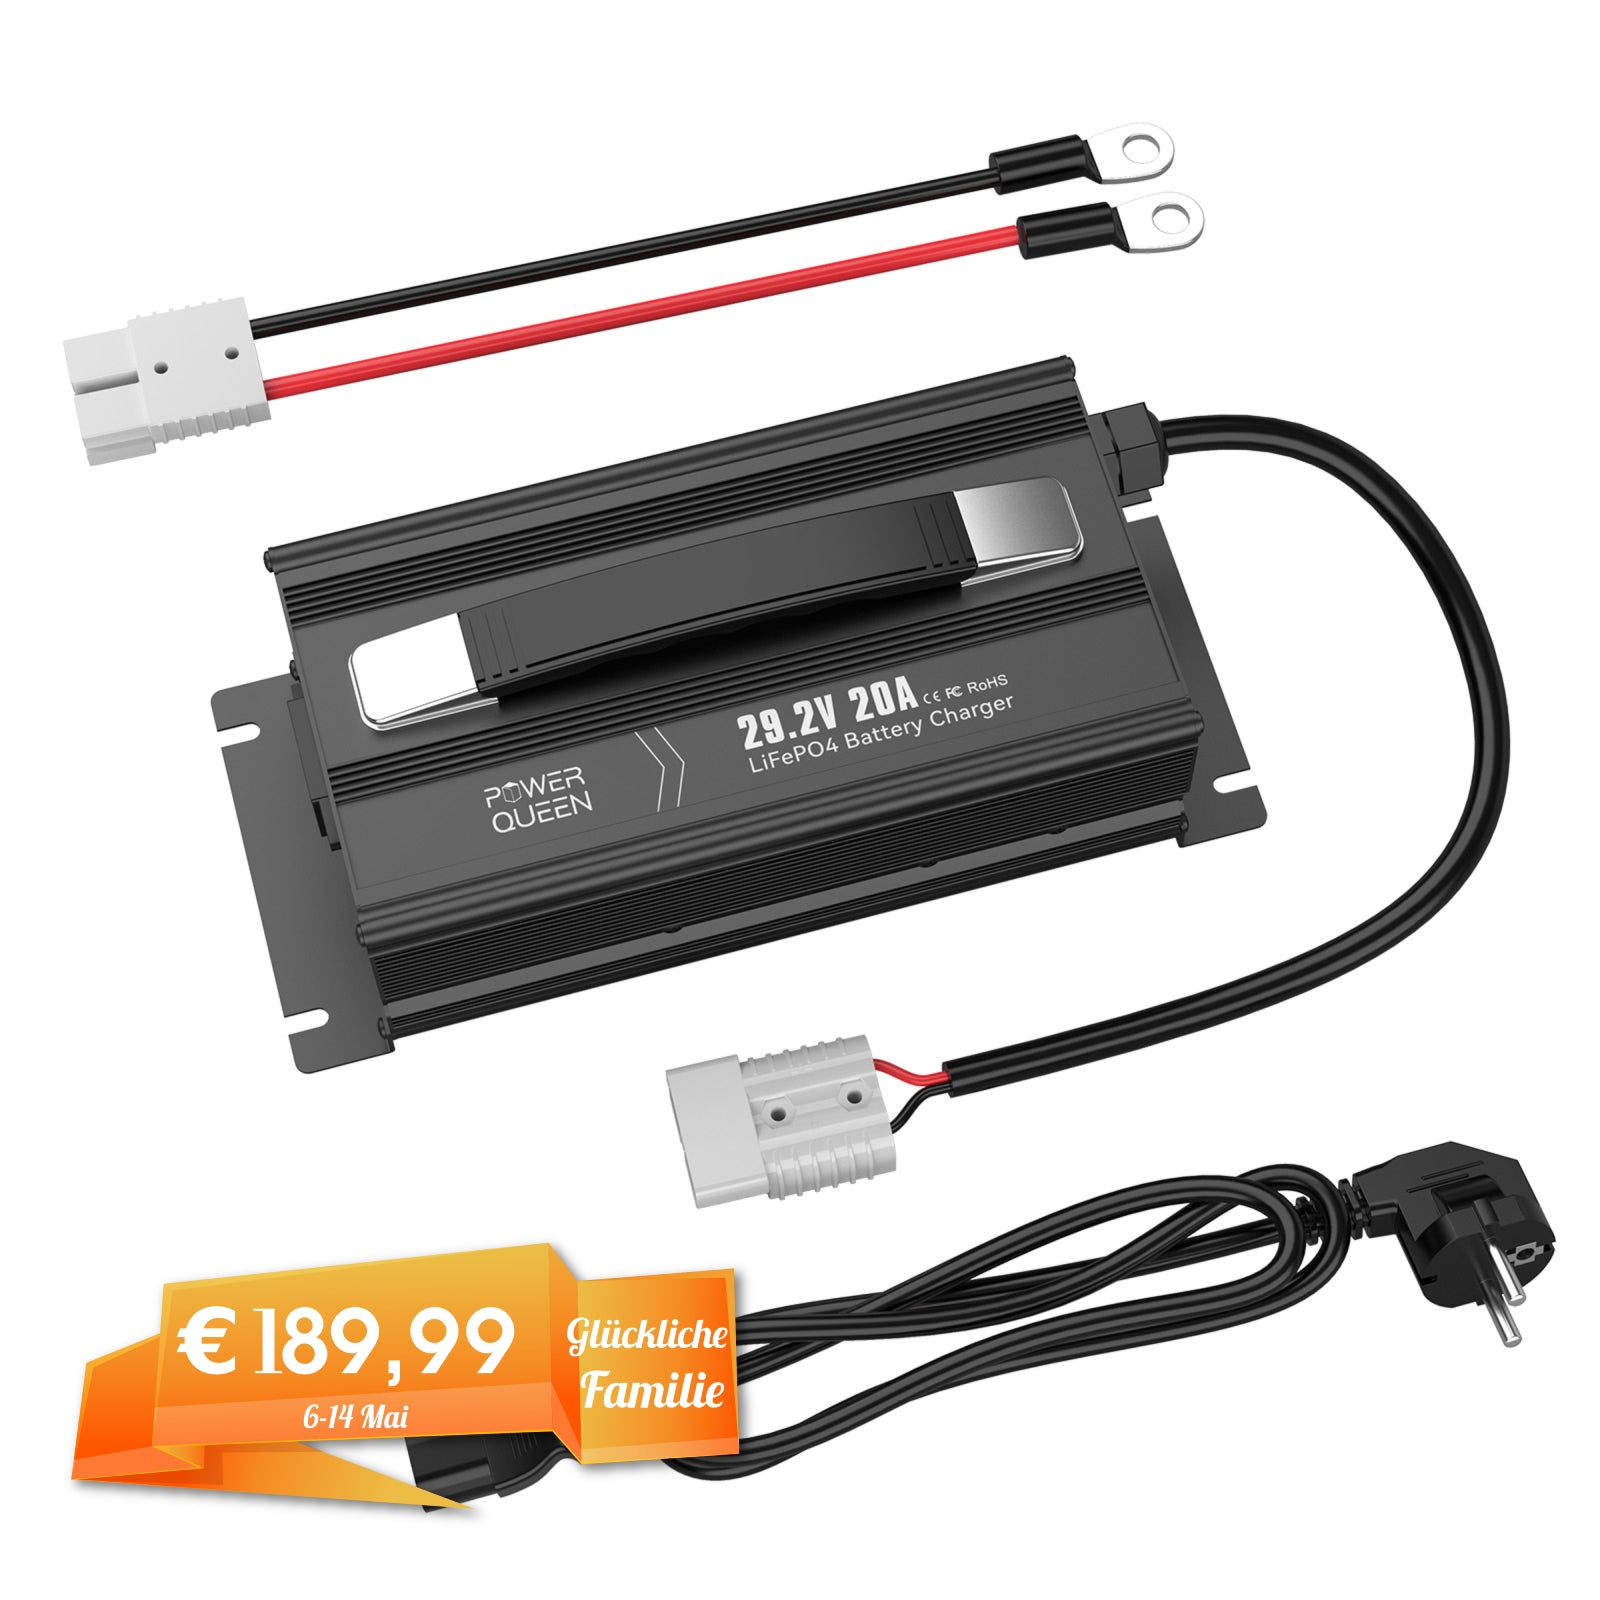 Chargeur Power Queen 29,2V 20A LiFePO4 pour batterie 24V LiFePO4